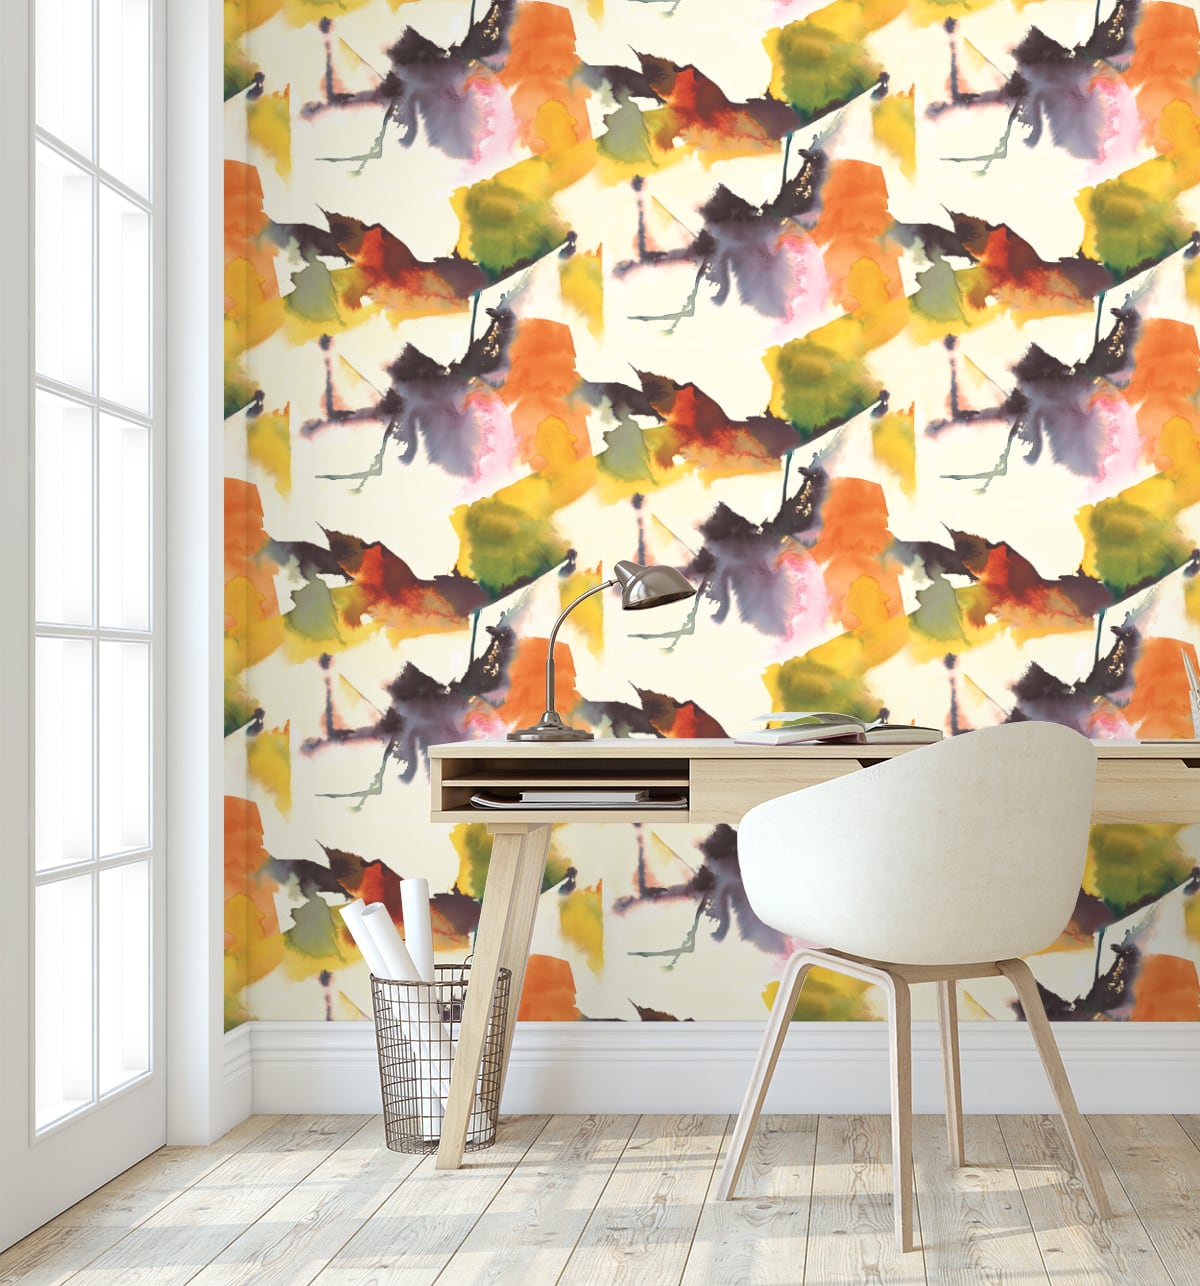 NOON Peel and Stick Wallpaper  Modern Abstract Wall Sticker 45cm x 250cm   SelfAdhesive Removable Wallpaper